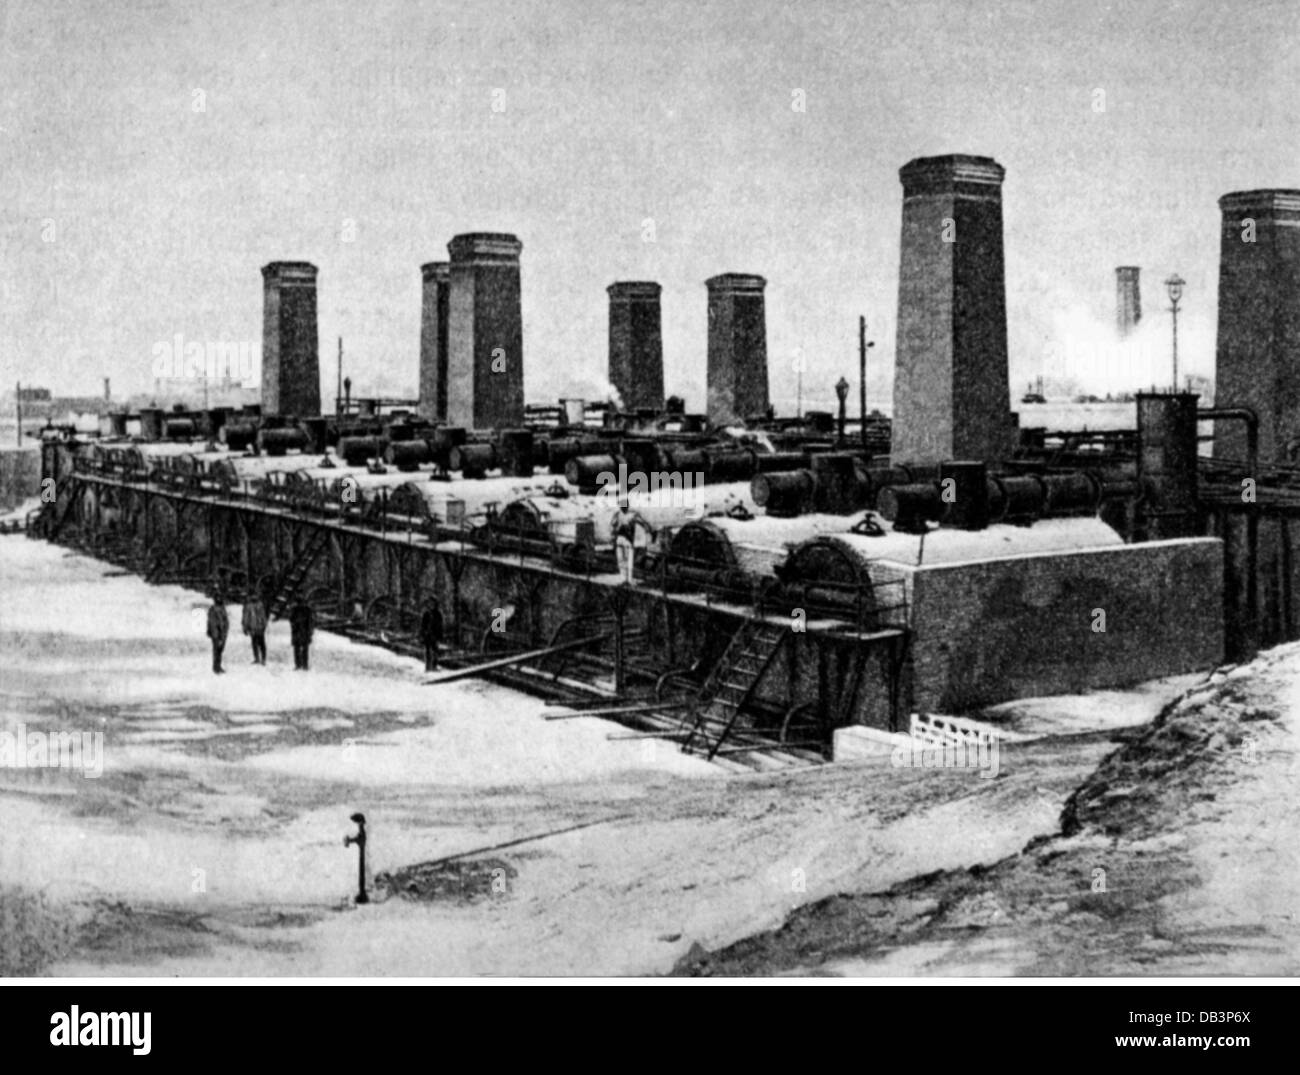 energy, petroleum, refinery, Baku, 1898, Additional-Rights-Clearences-Not Available Stock Photo